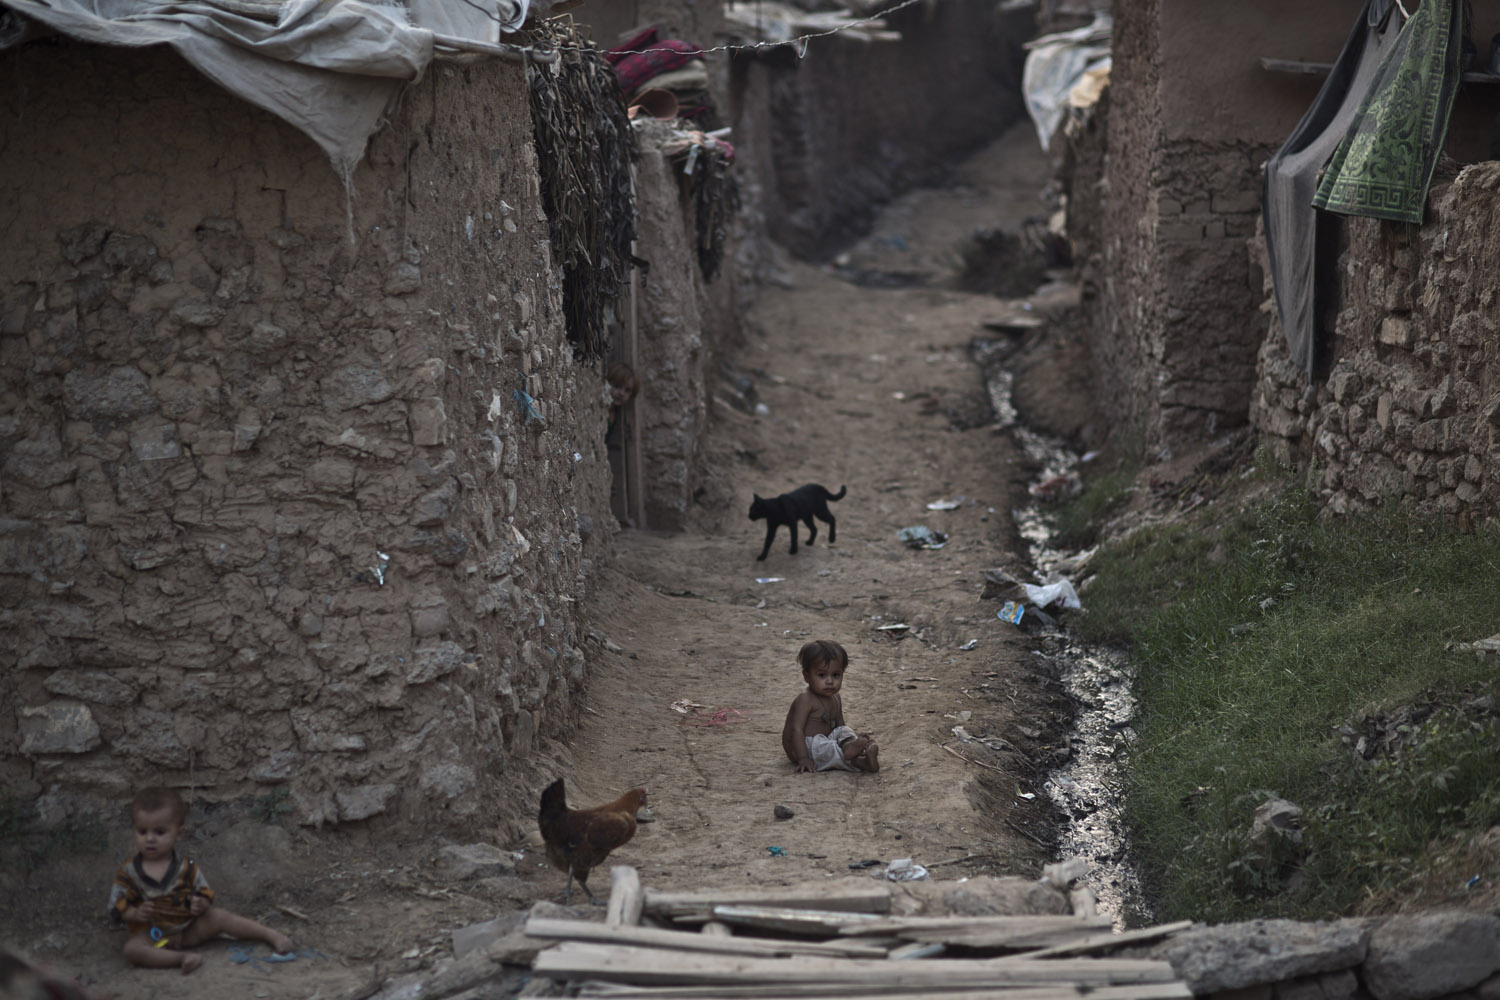 Oct. 10, 2013. Afghan refugee children play on the ground in an alley of a poor neighborhood on the outskirts of Islamabad.